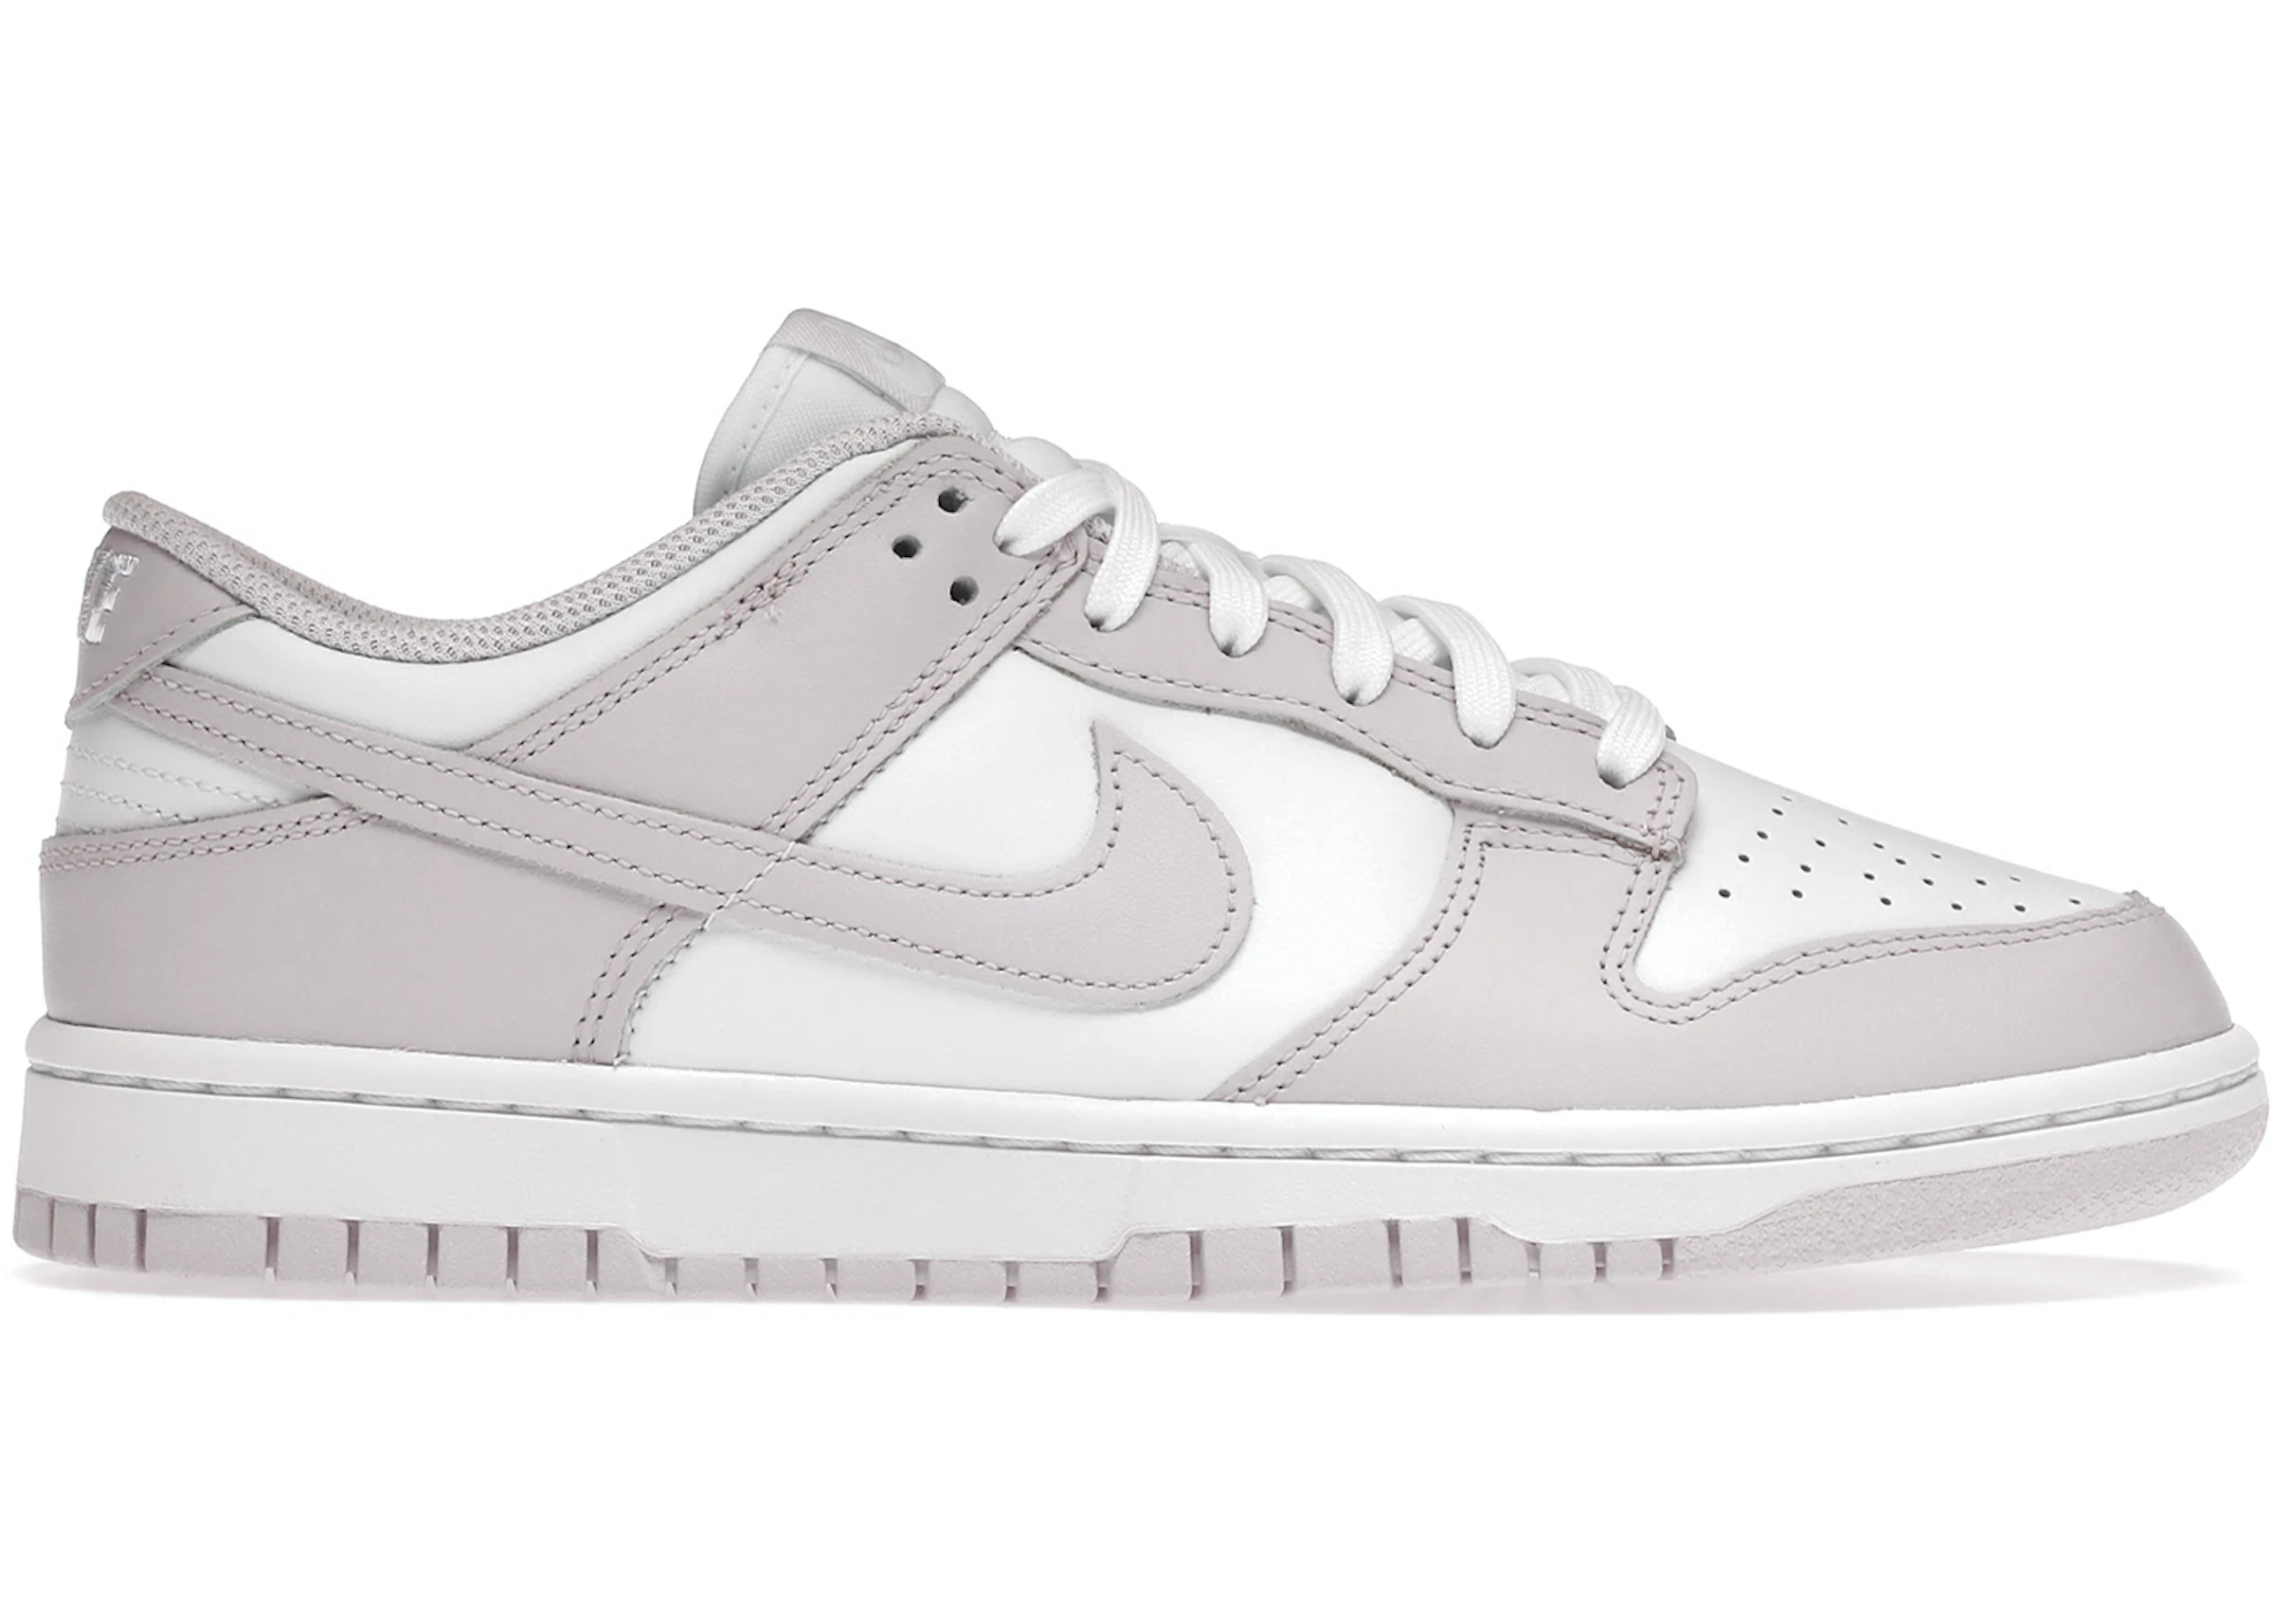 Buy Nike vast gray dunks Dunk Low Shoes & New Sneakers - StockX